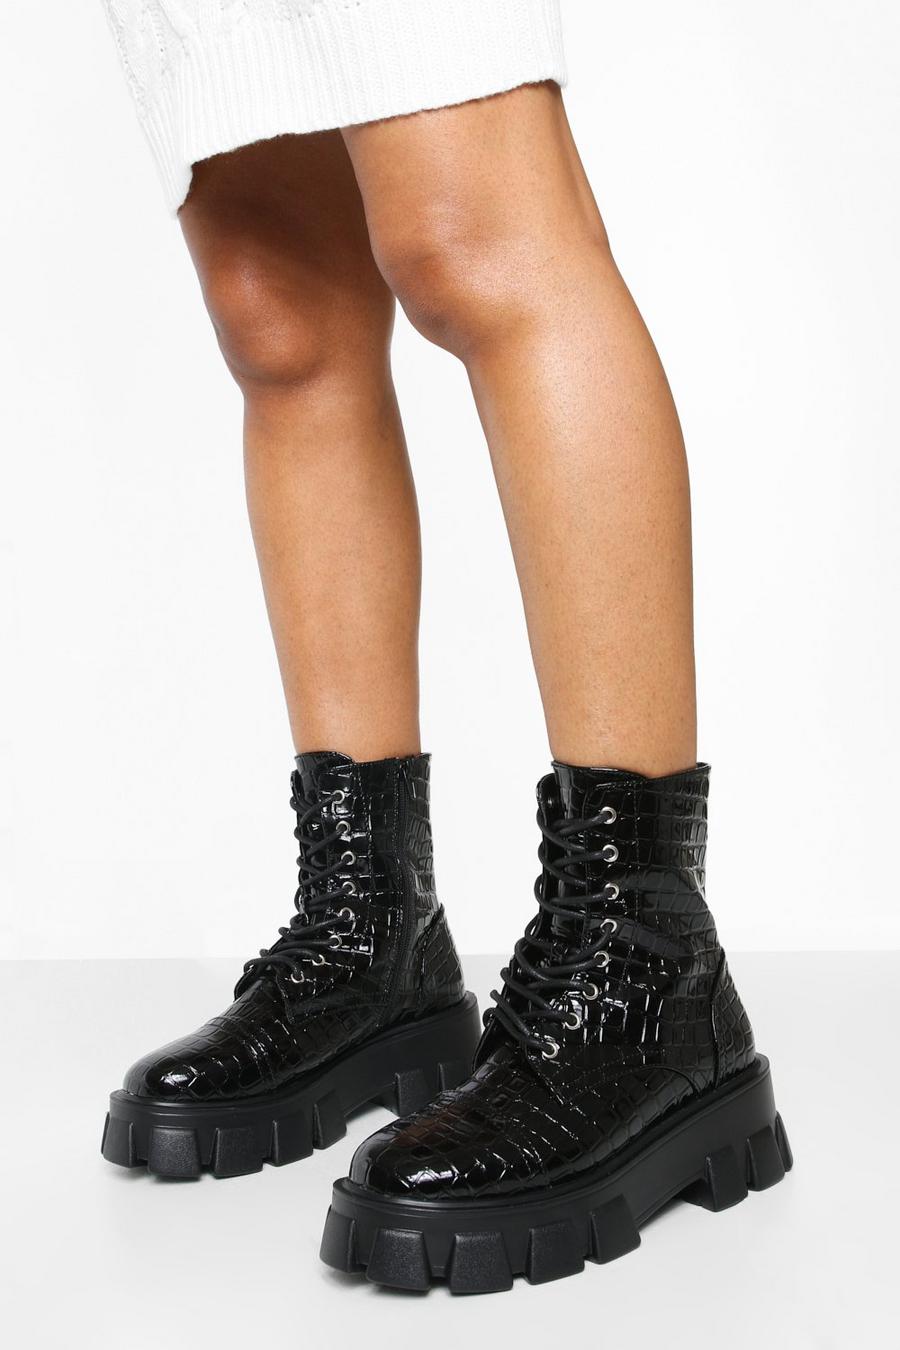 Black Patent Croc Chunky Cleated Sole Hiker Boots